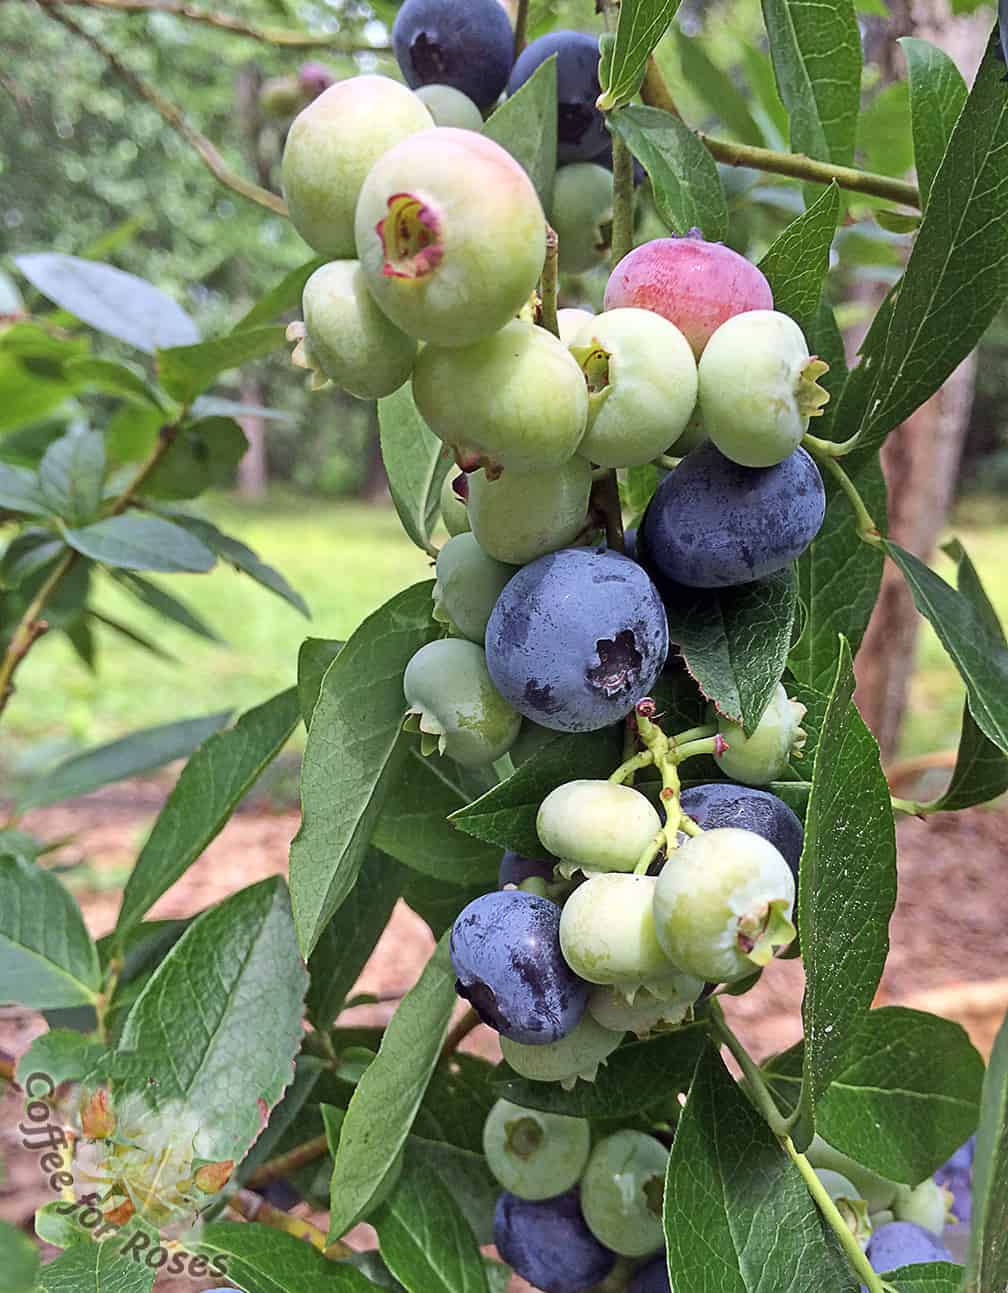 Picking ripe blueberries is one of the pleasures of mid-summer. 